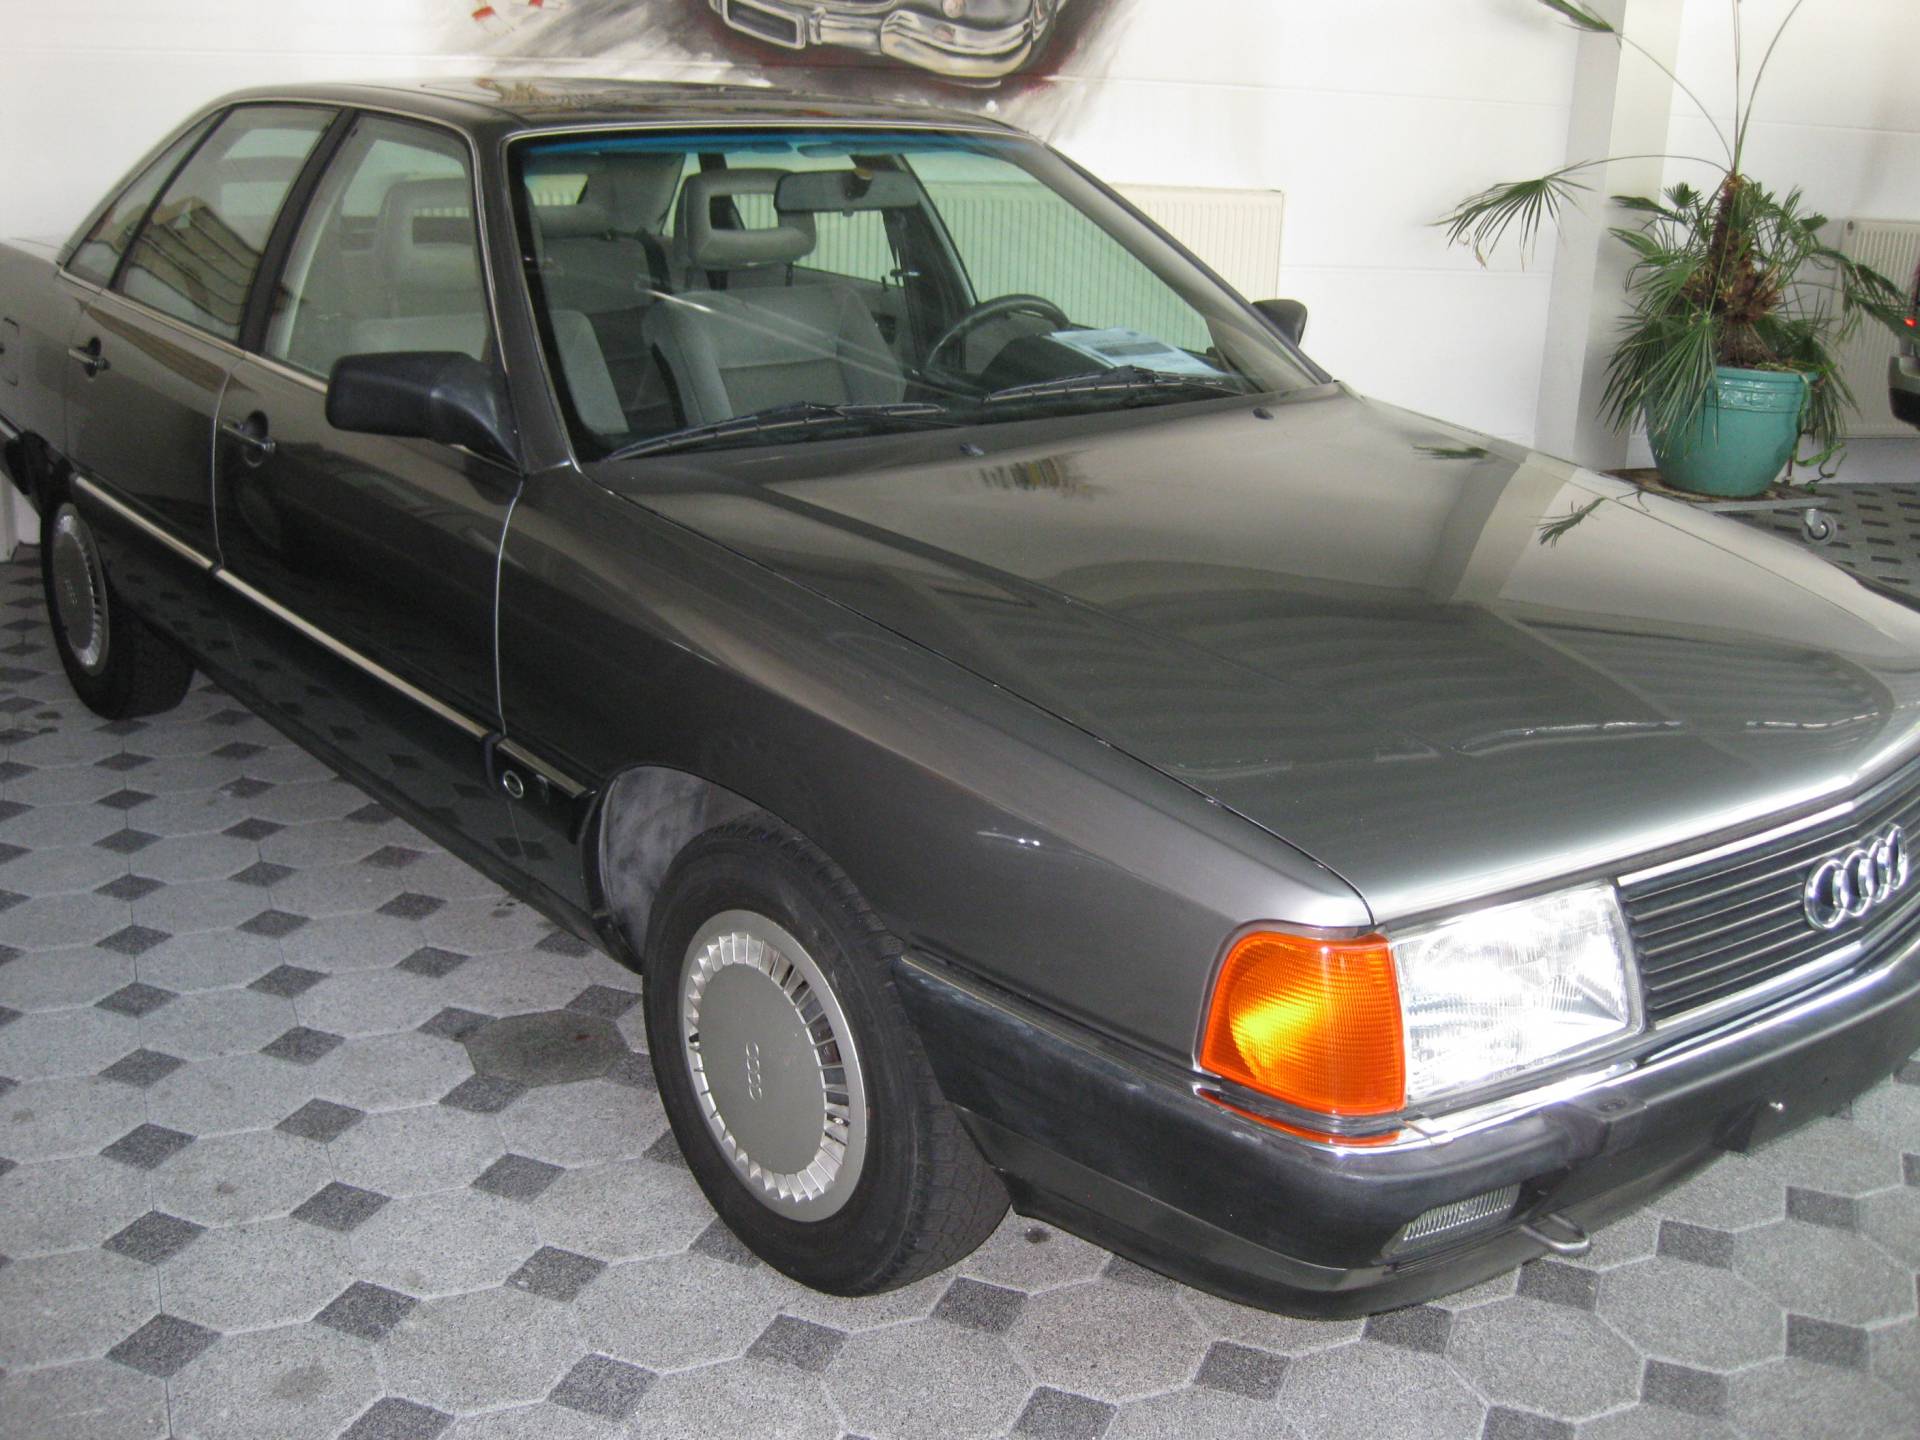 For Sale: Audi 100 - 2.0 (1986) offered for AUD 15,150